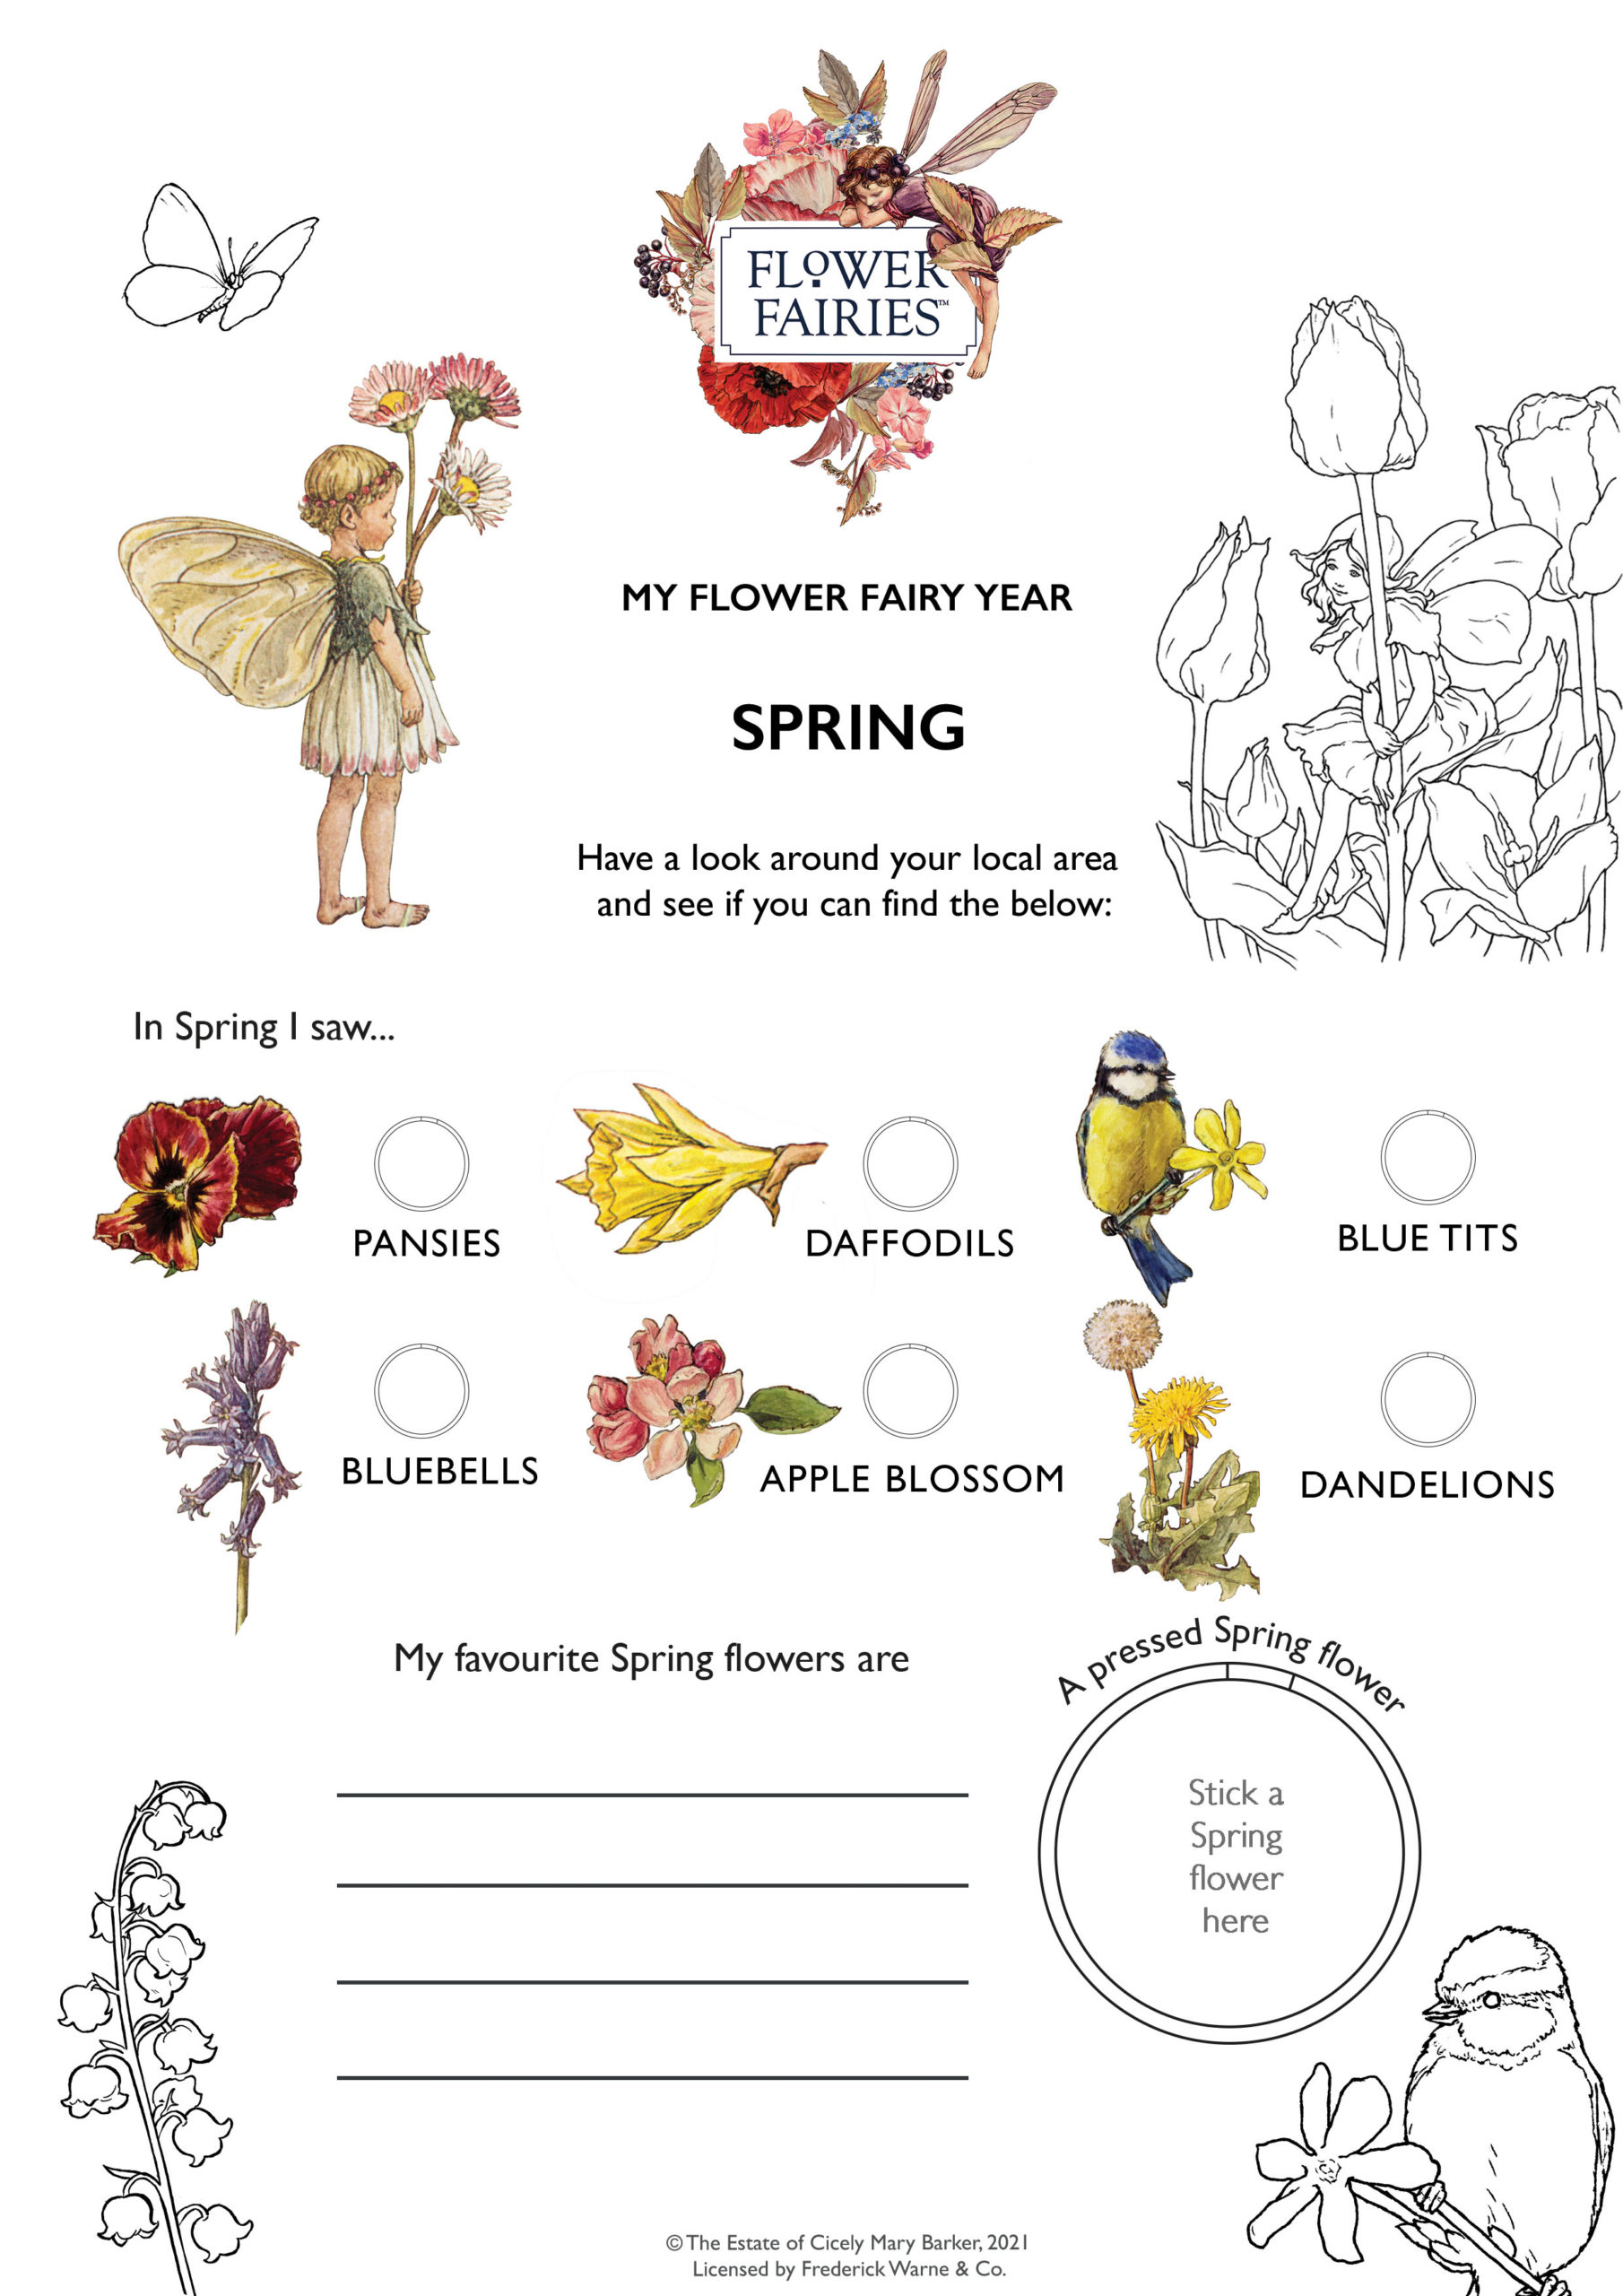 Spring Flowers Activity Sheet